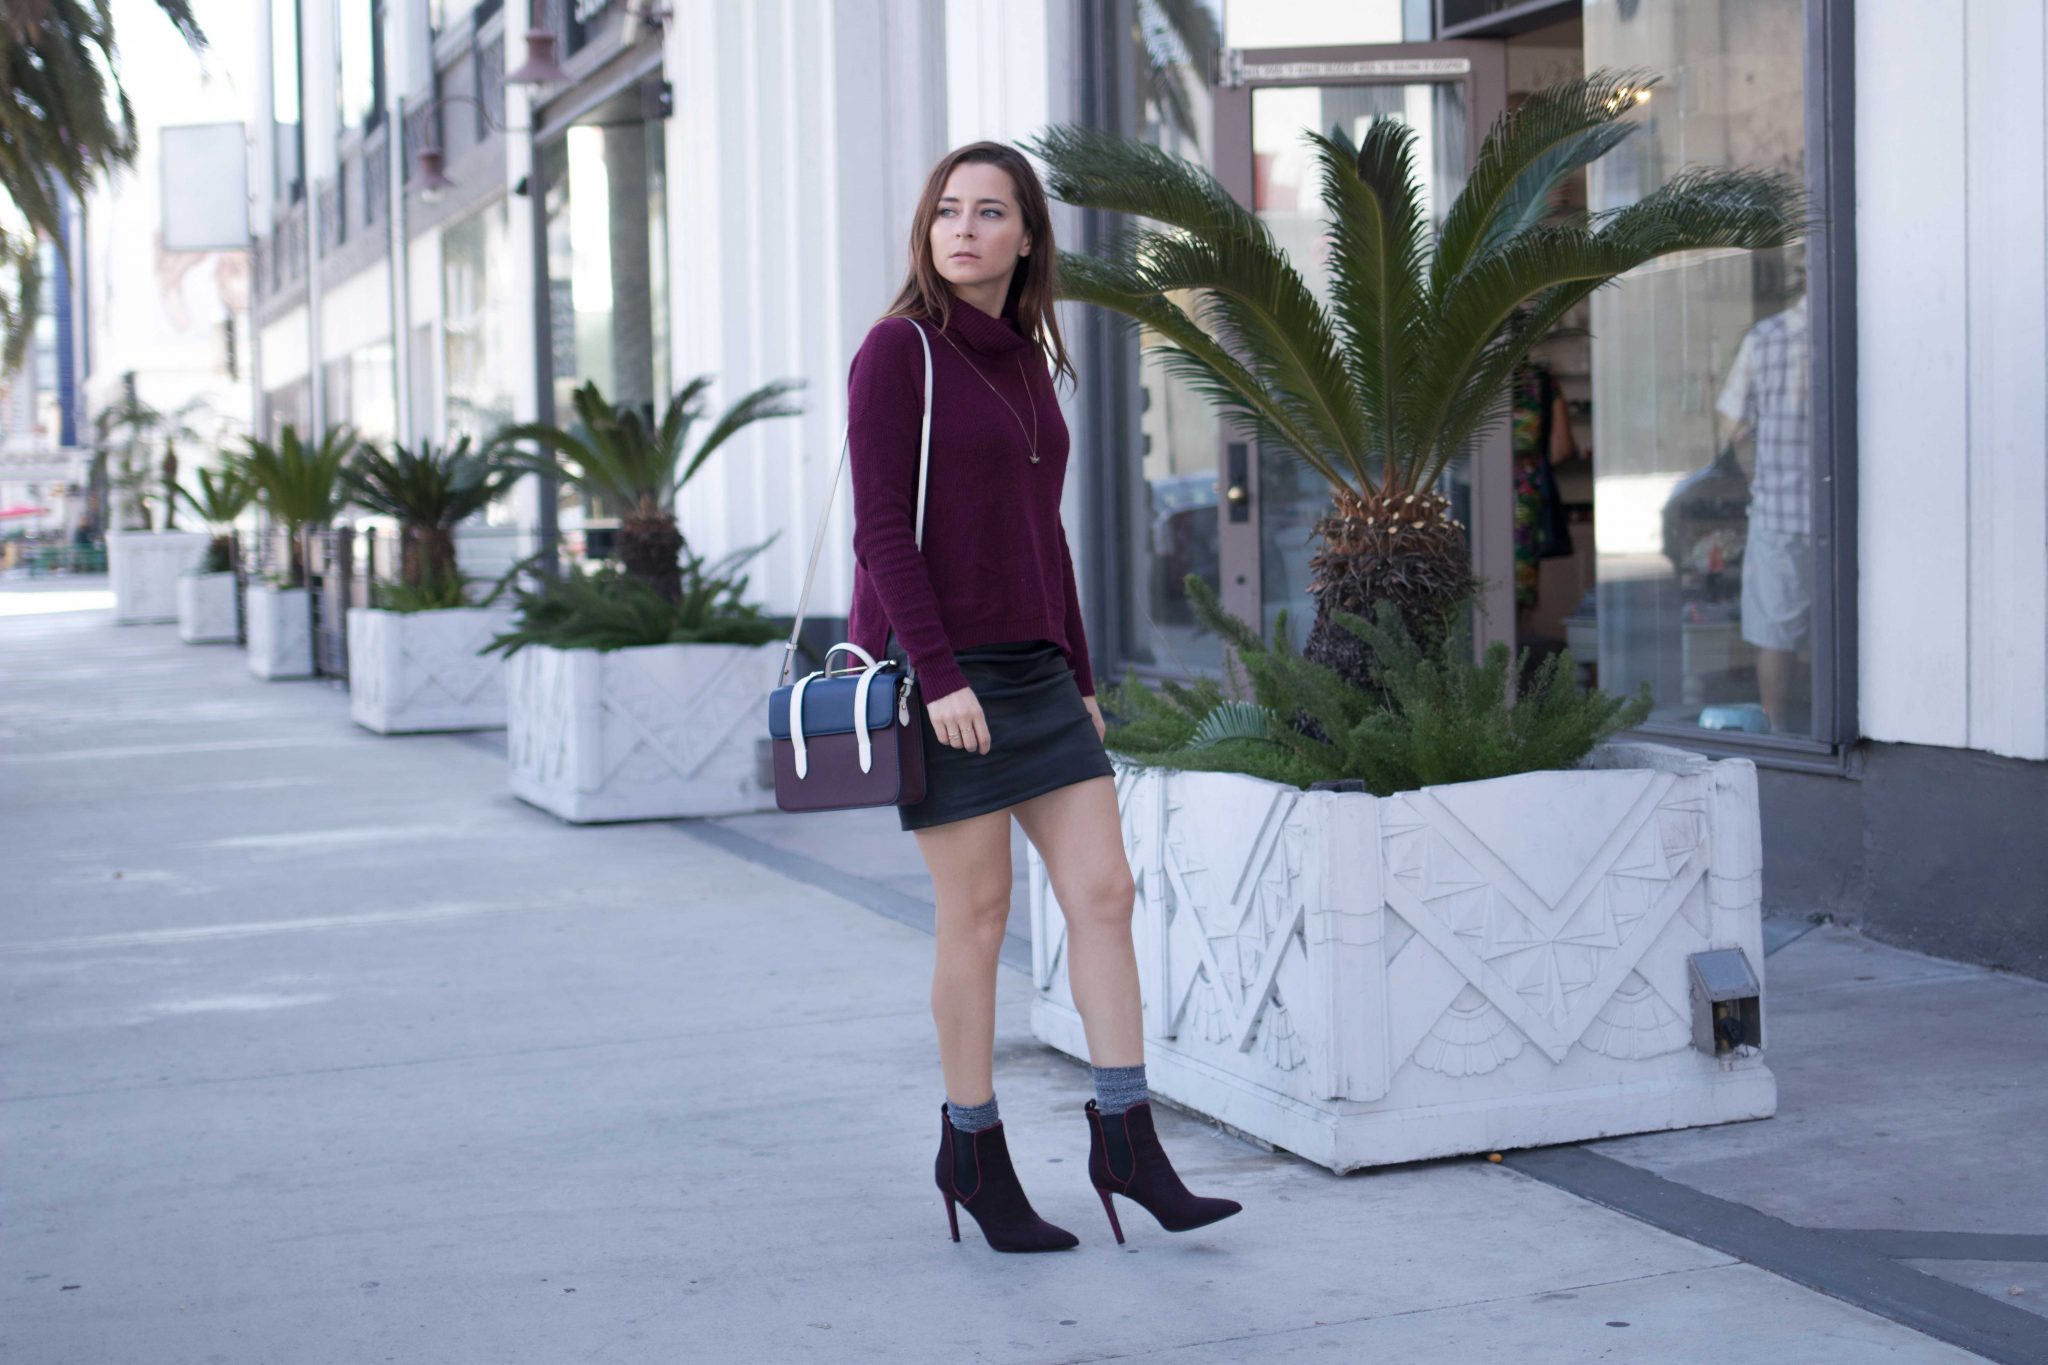 Best burgundy accessories Burgundy Handbags and Burgundy Shoes Fall winter 2017. Read more on Houseofcomil.com and discover the designers Strathberry and Erin Adamson Luxury Shoes